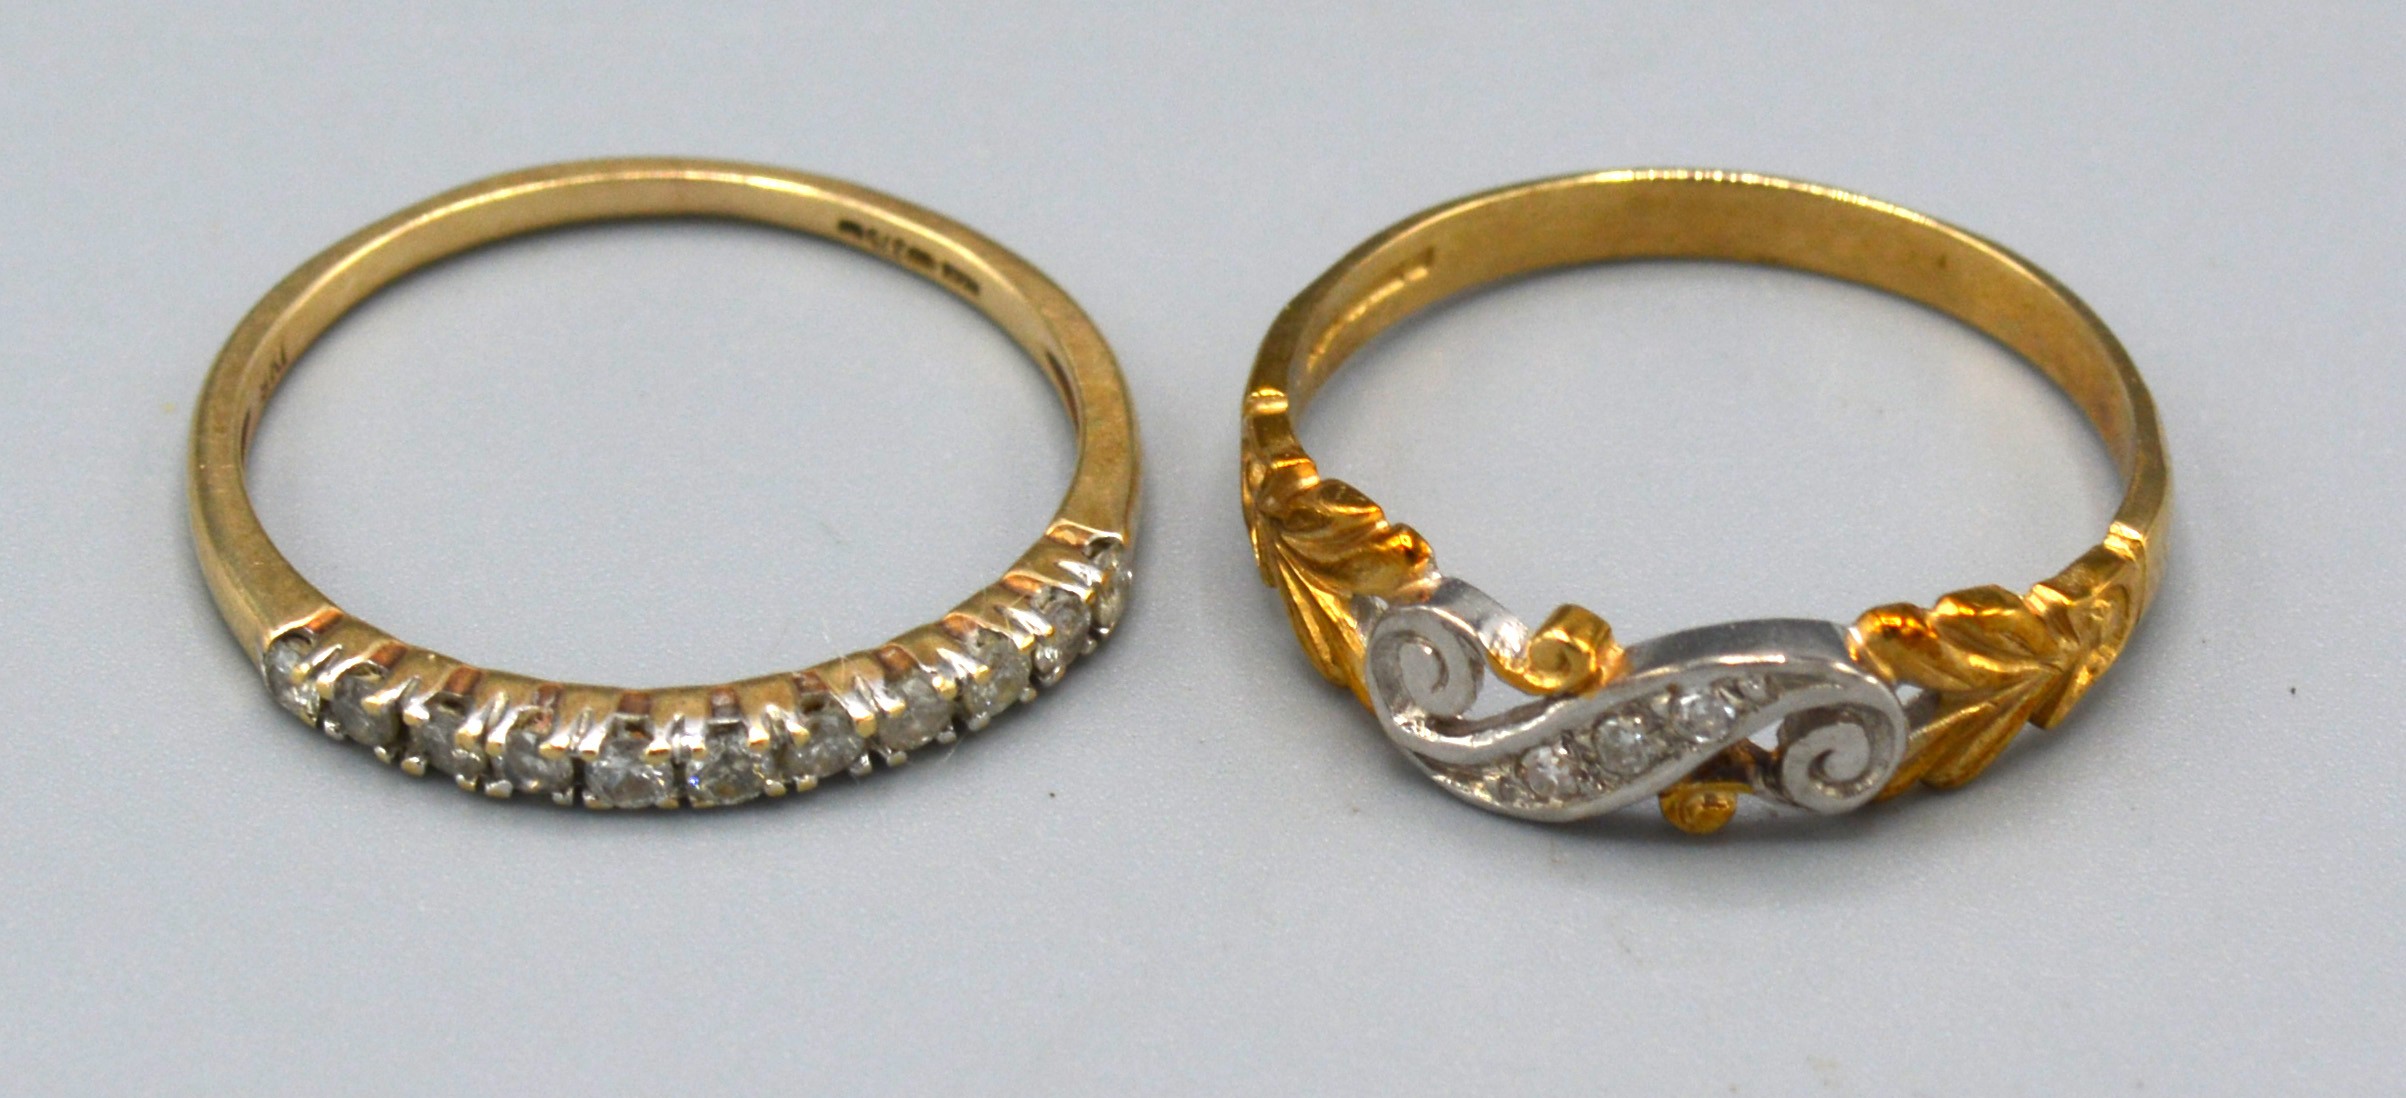 A 9ct. Gold Dress Ring of scroll form set three small diamonds, ring size P, 1.7 gms. together